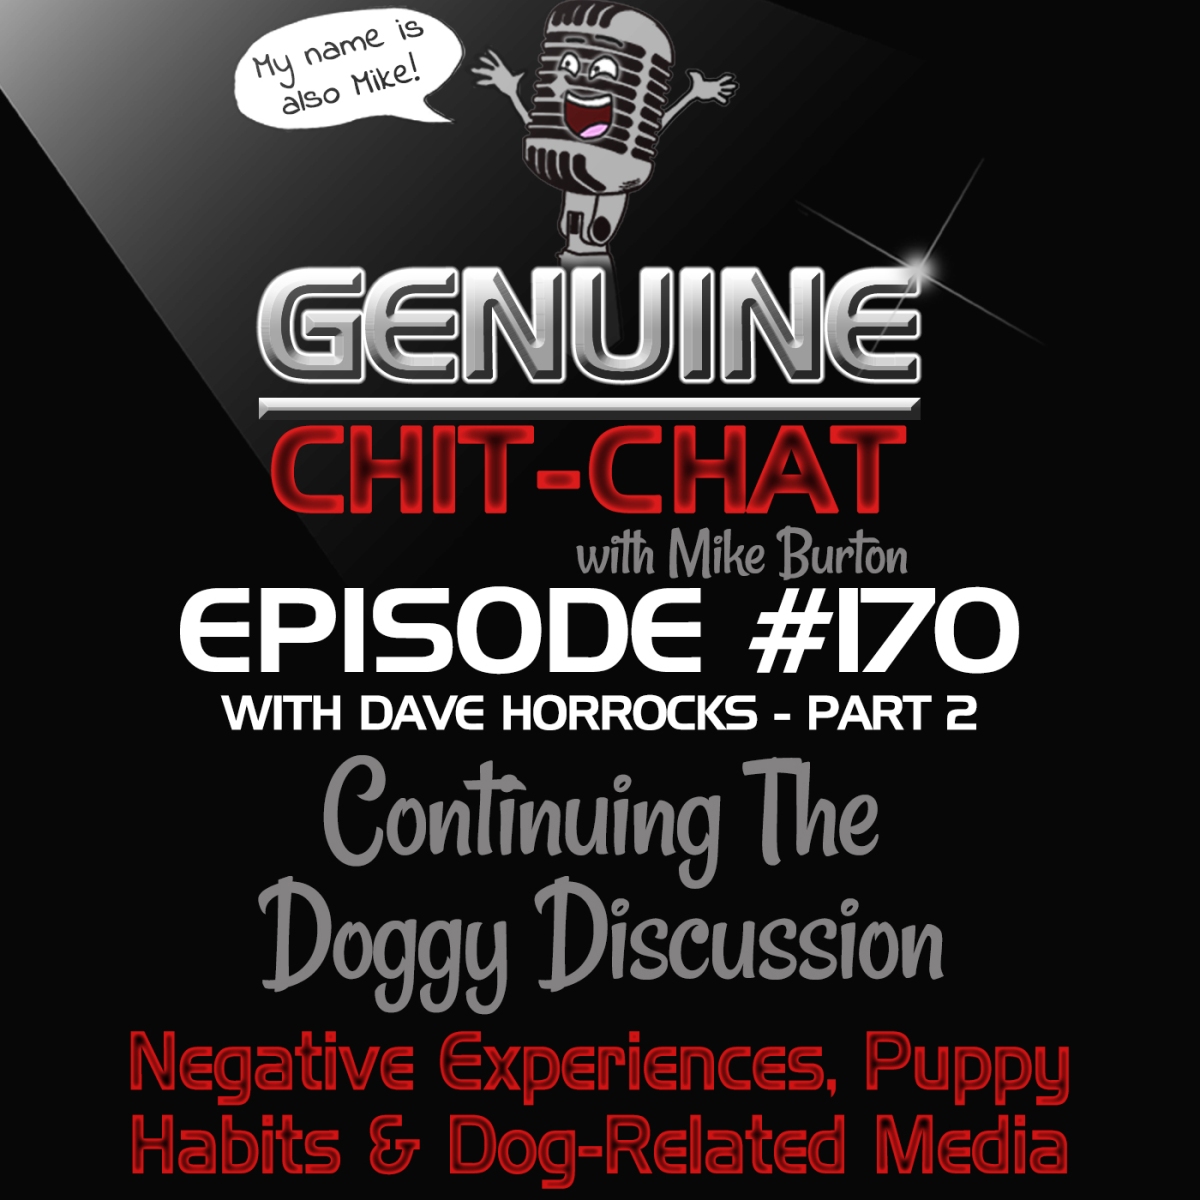 #170 Pt 2 – Continuing The Doggy Discussion; Negative Experiences, Puppy Habits & Dog-Related Media With Dave Horrocks